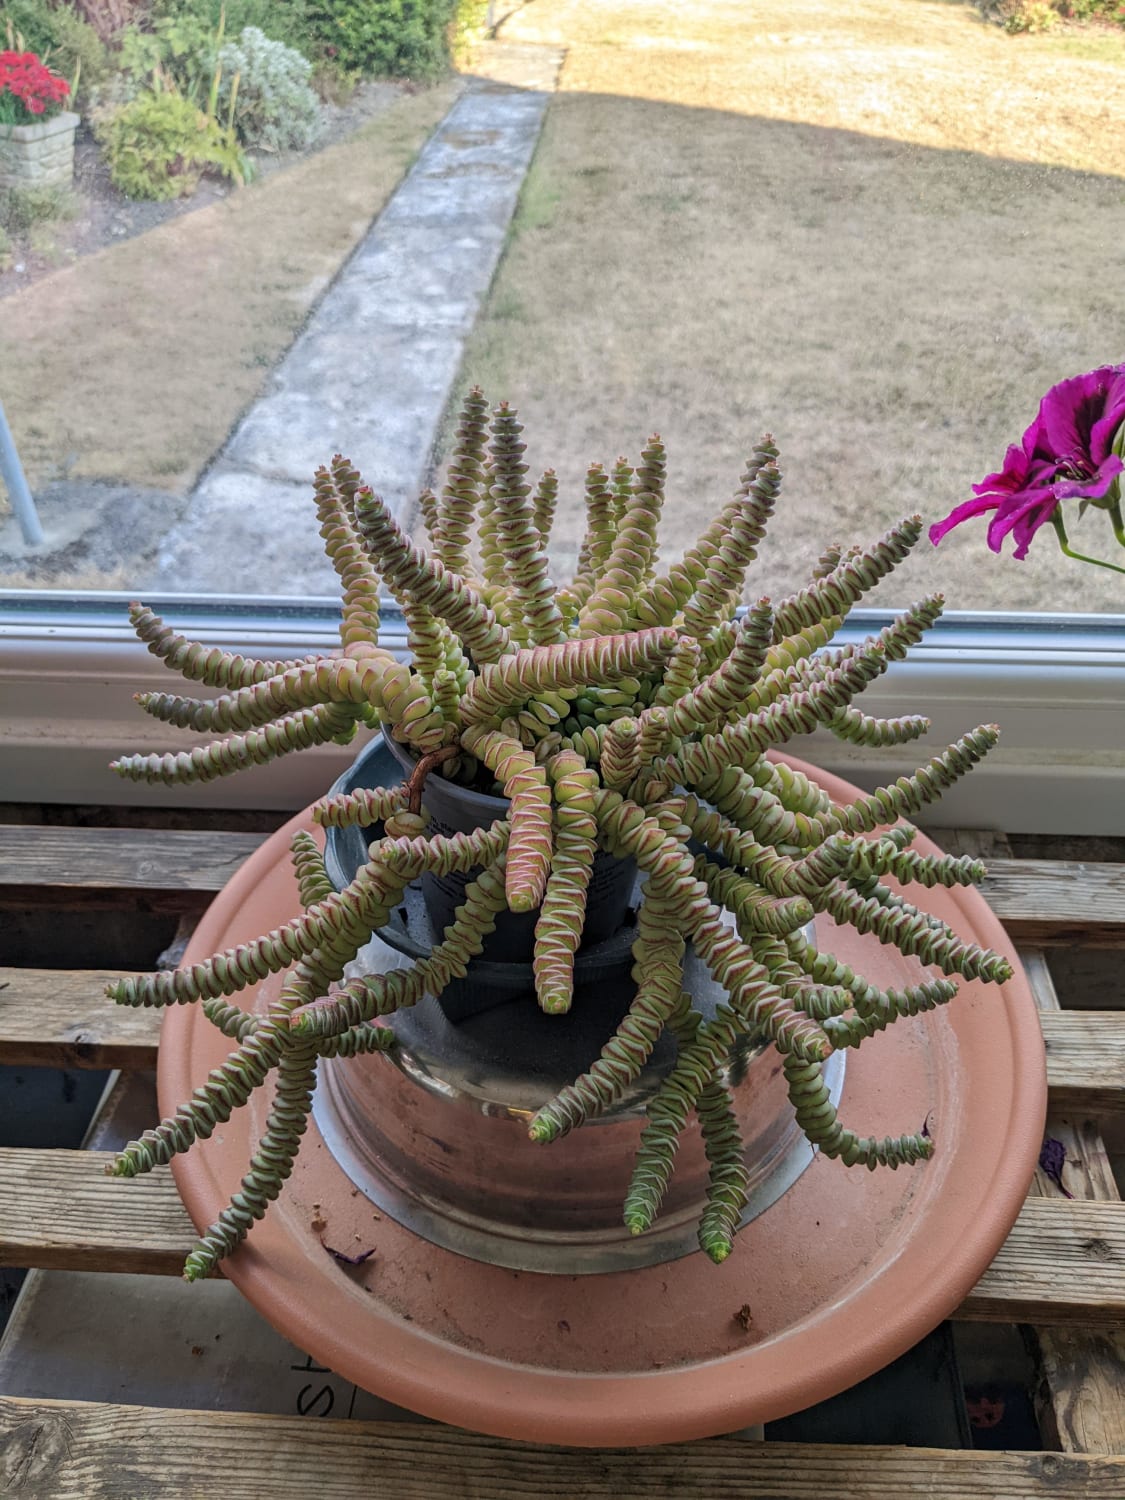 So I gave my Grandma her first succulent as a cutting. She calls it the funny little plant and despite never having cared for one before her natural green fingers have got it starting to flower and looking like this!